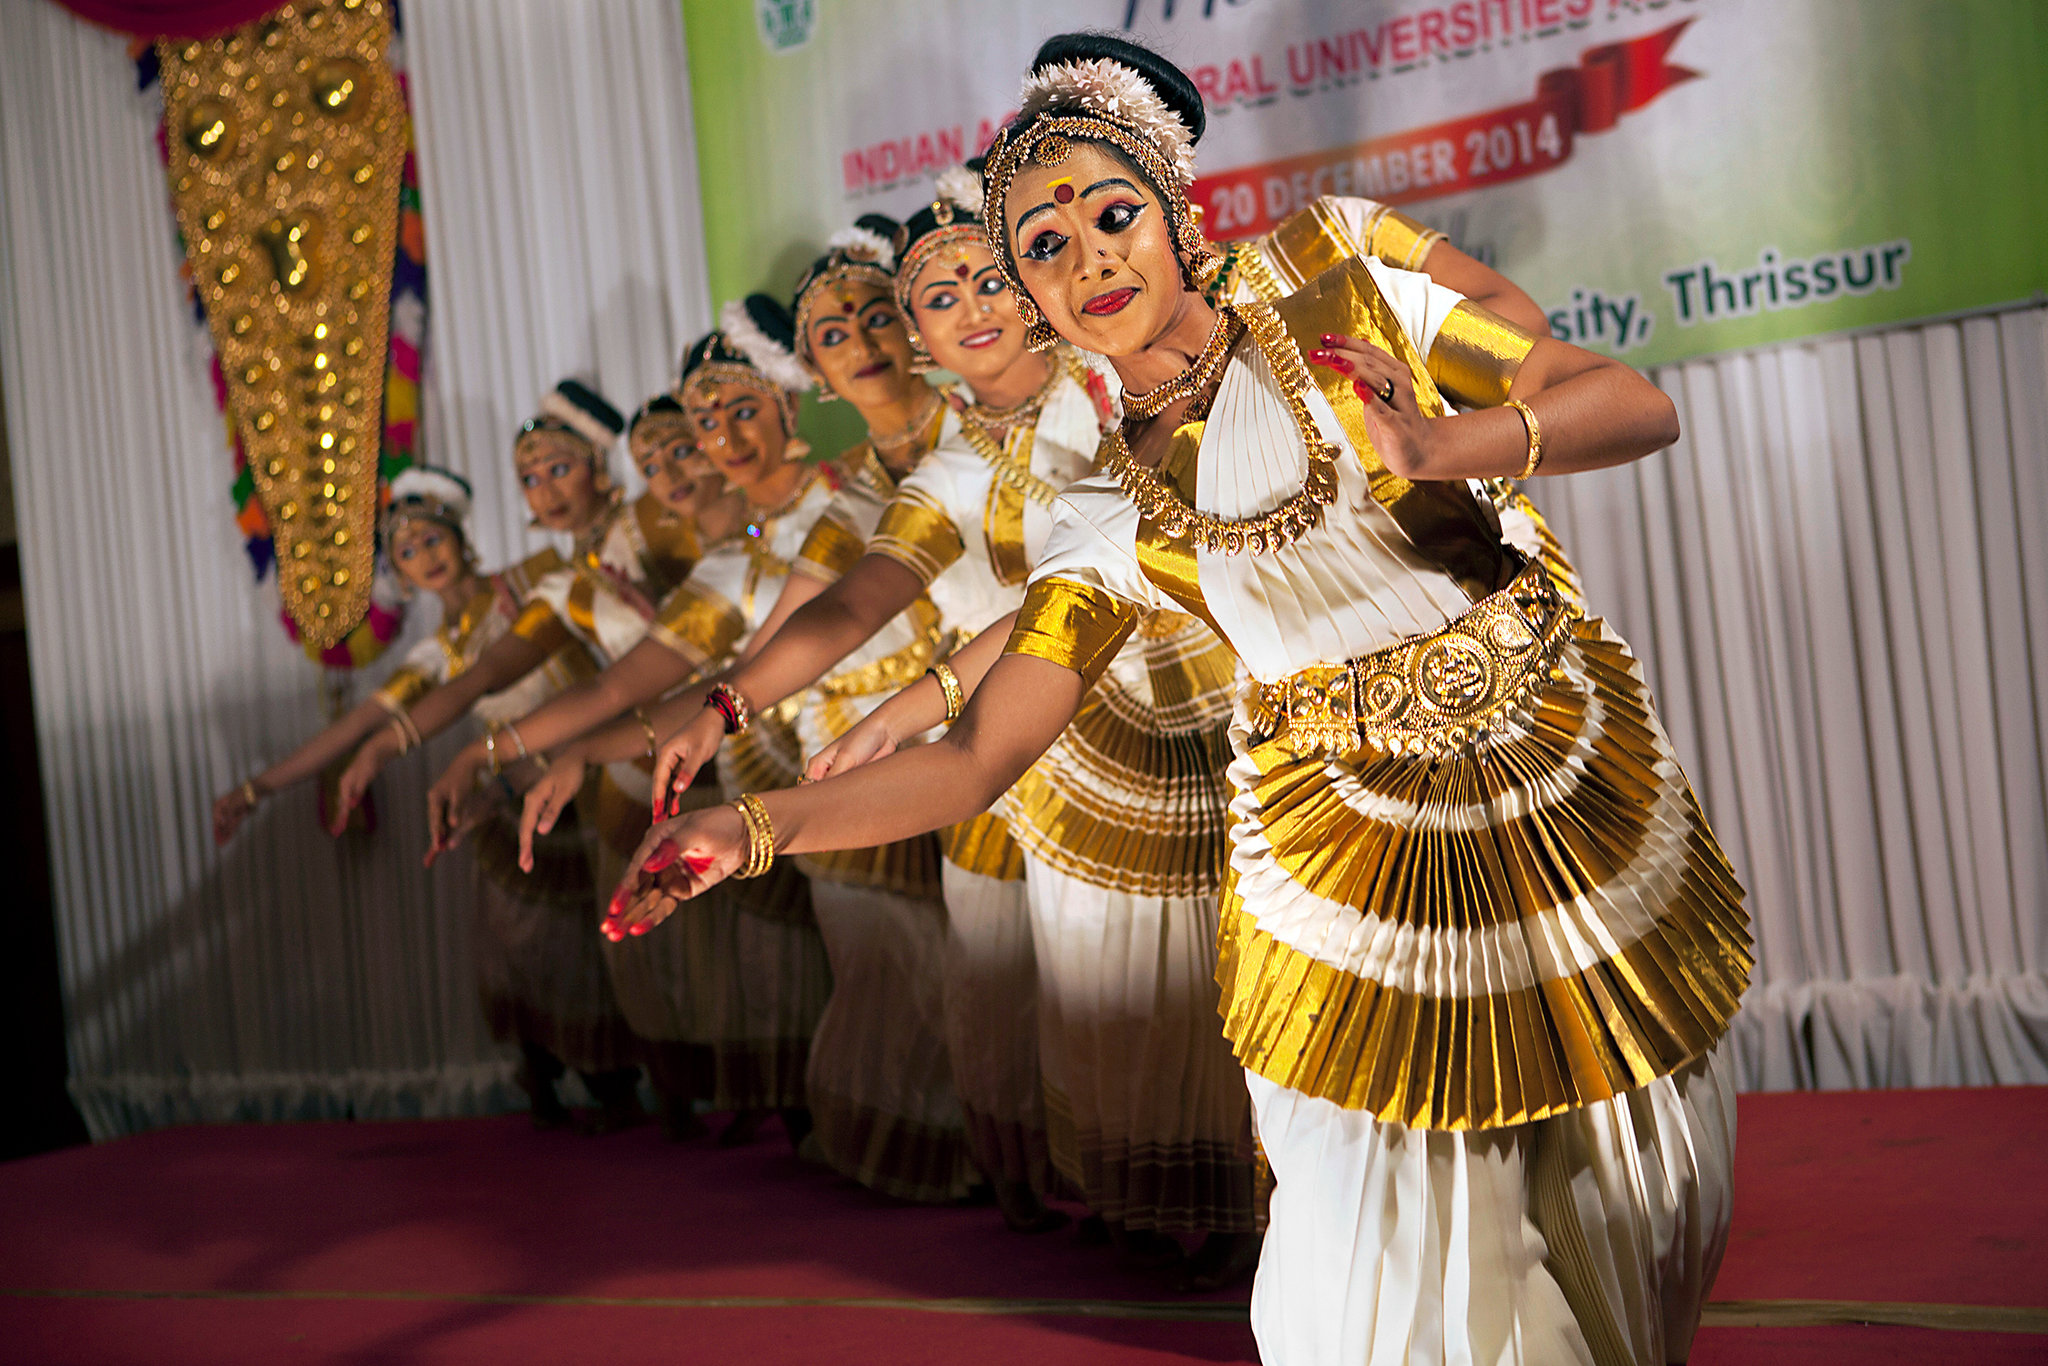 Dances of India, Rich in Breadth and Addressing the Sublime